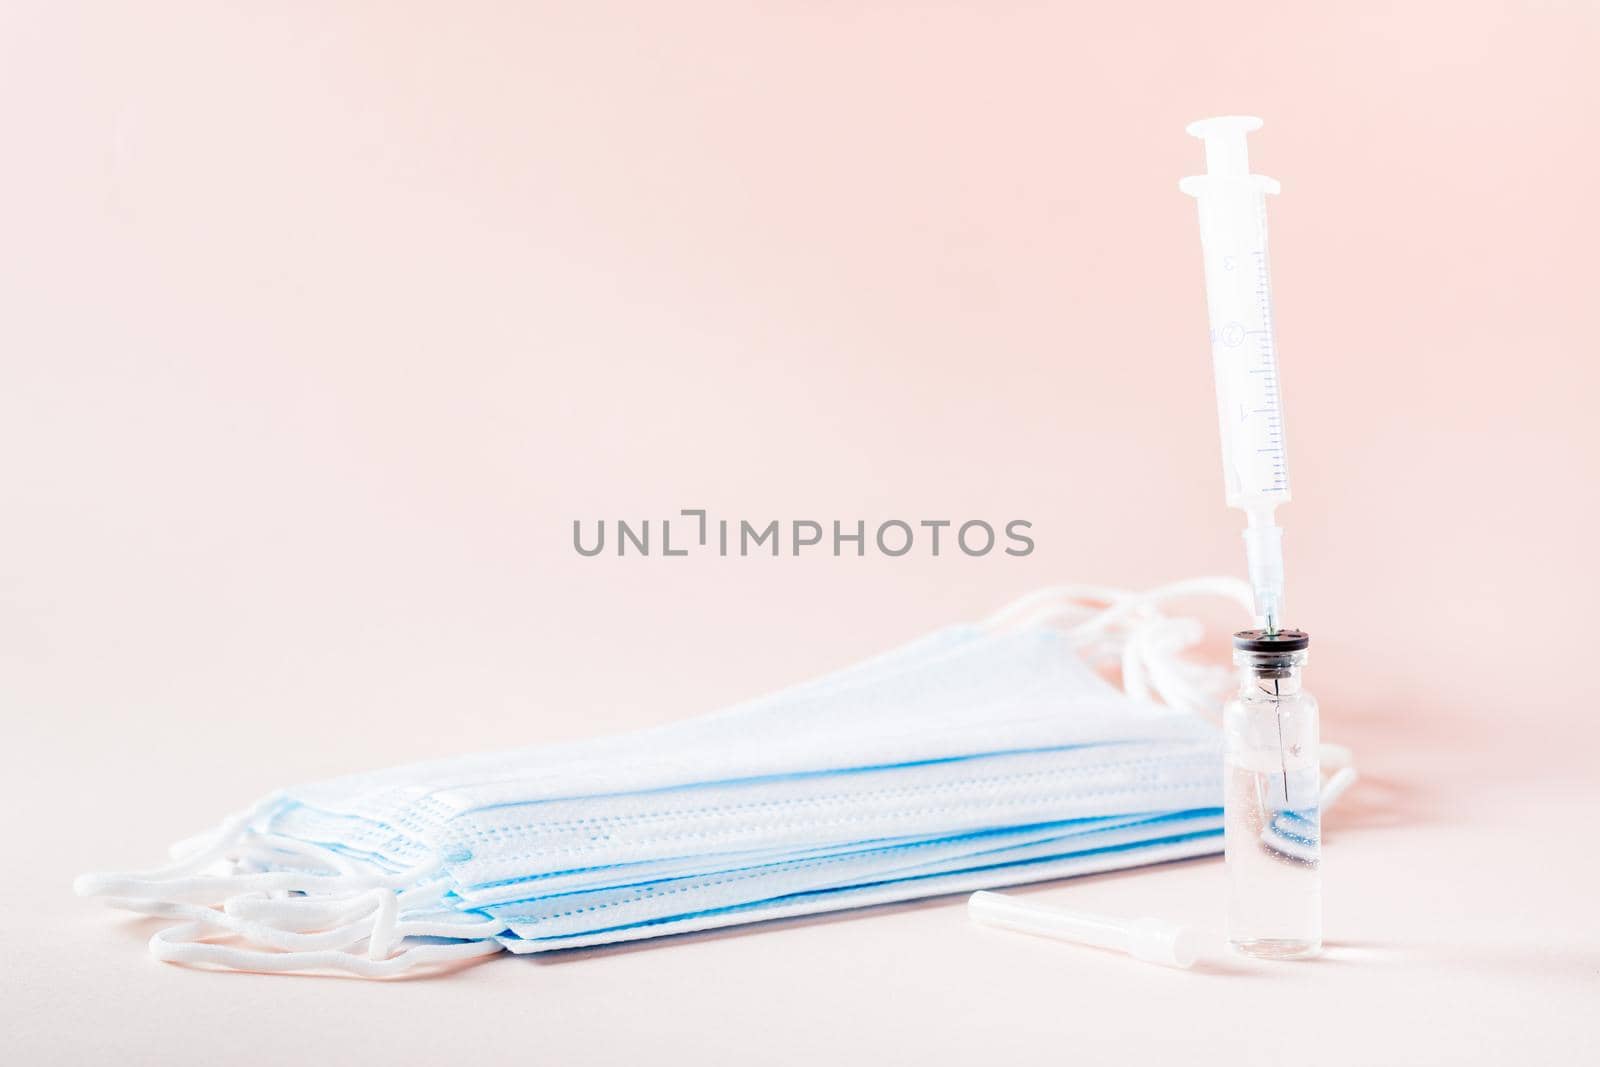 Vaccination and Immunization. Syringe needle inserted into glass vaccine vial and face mask